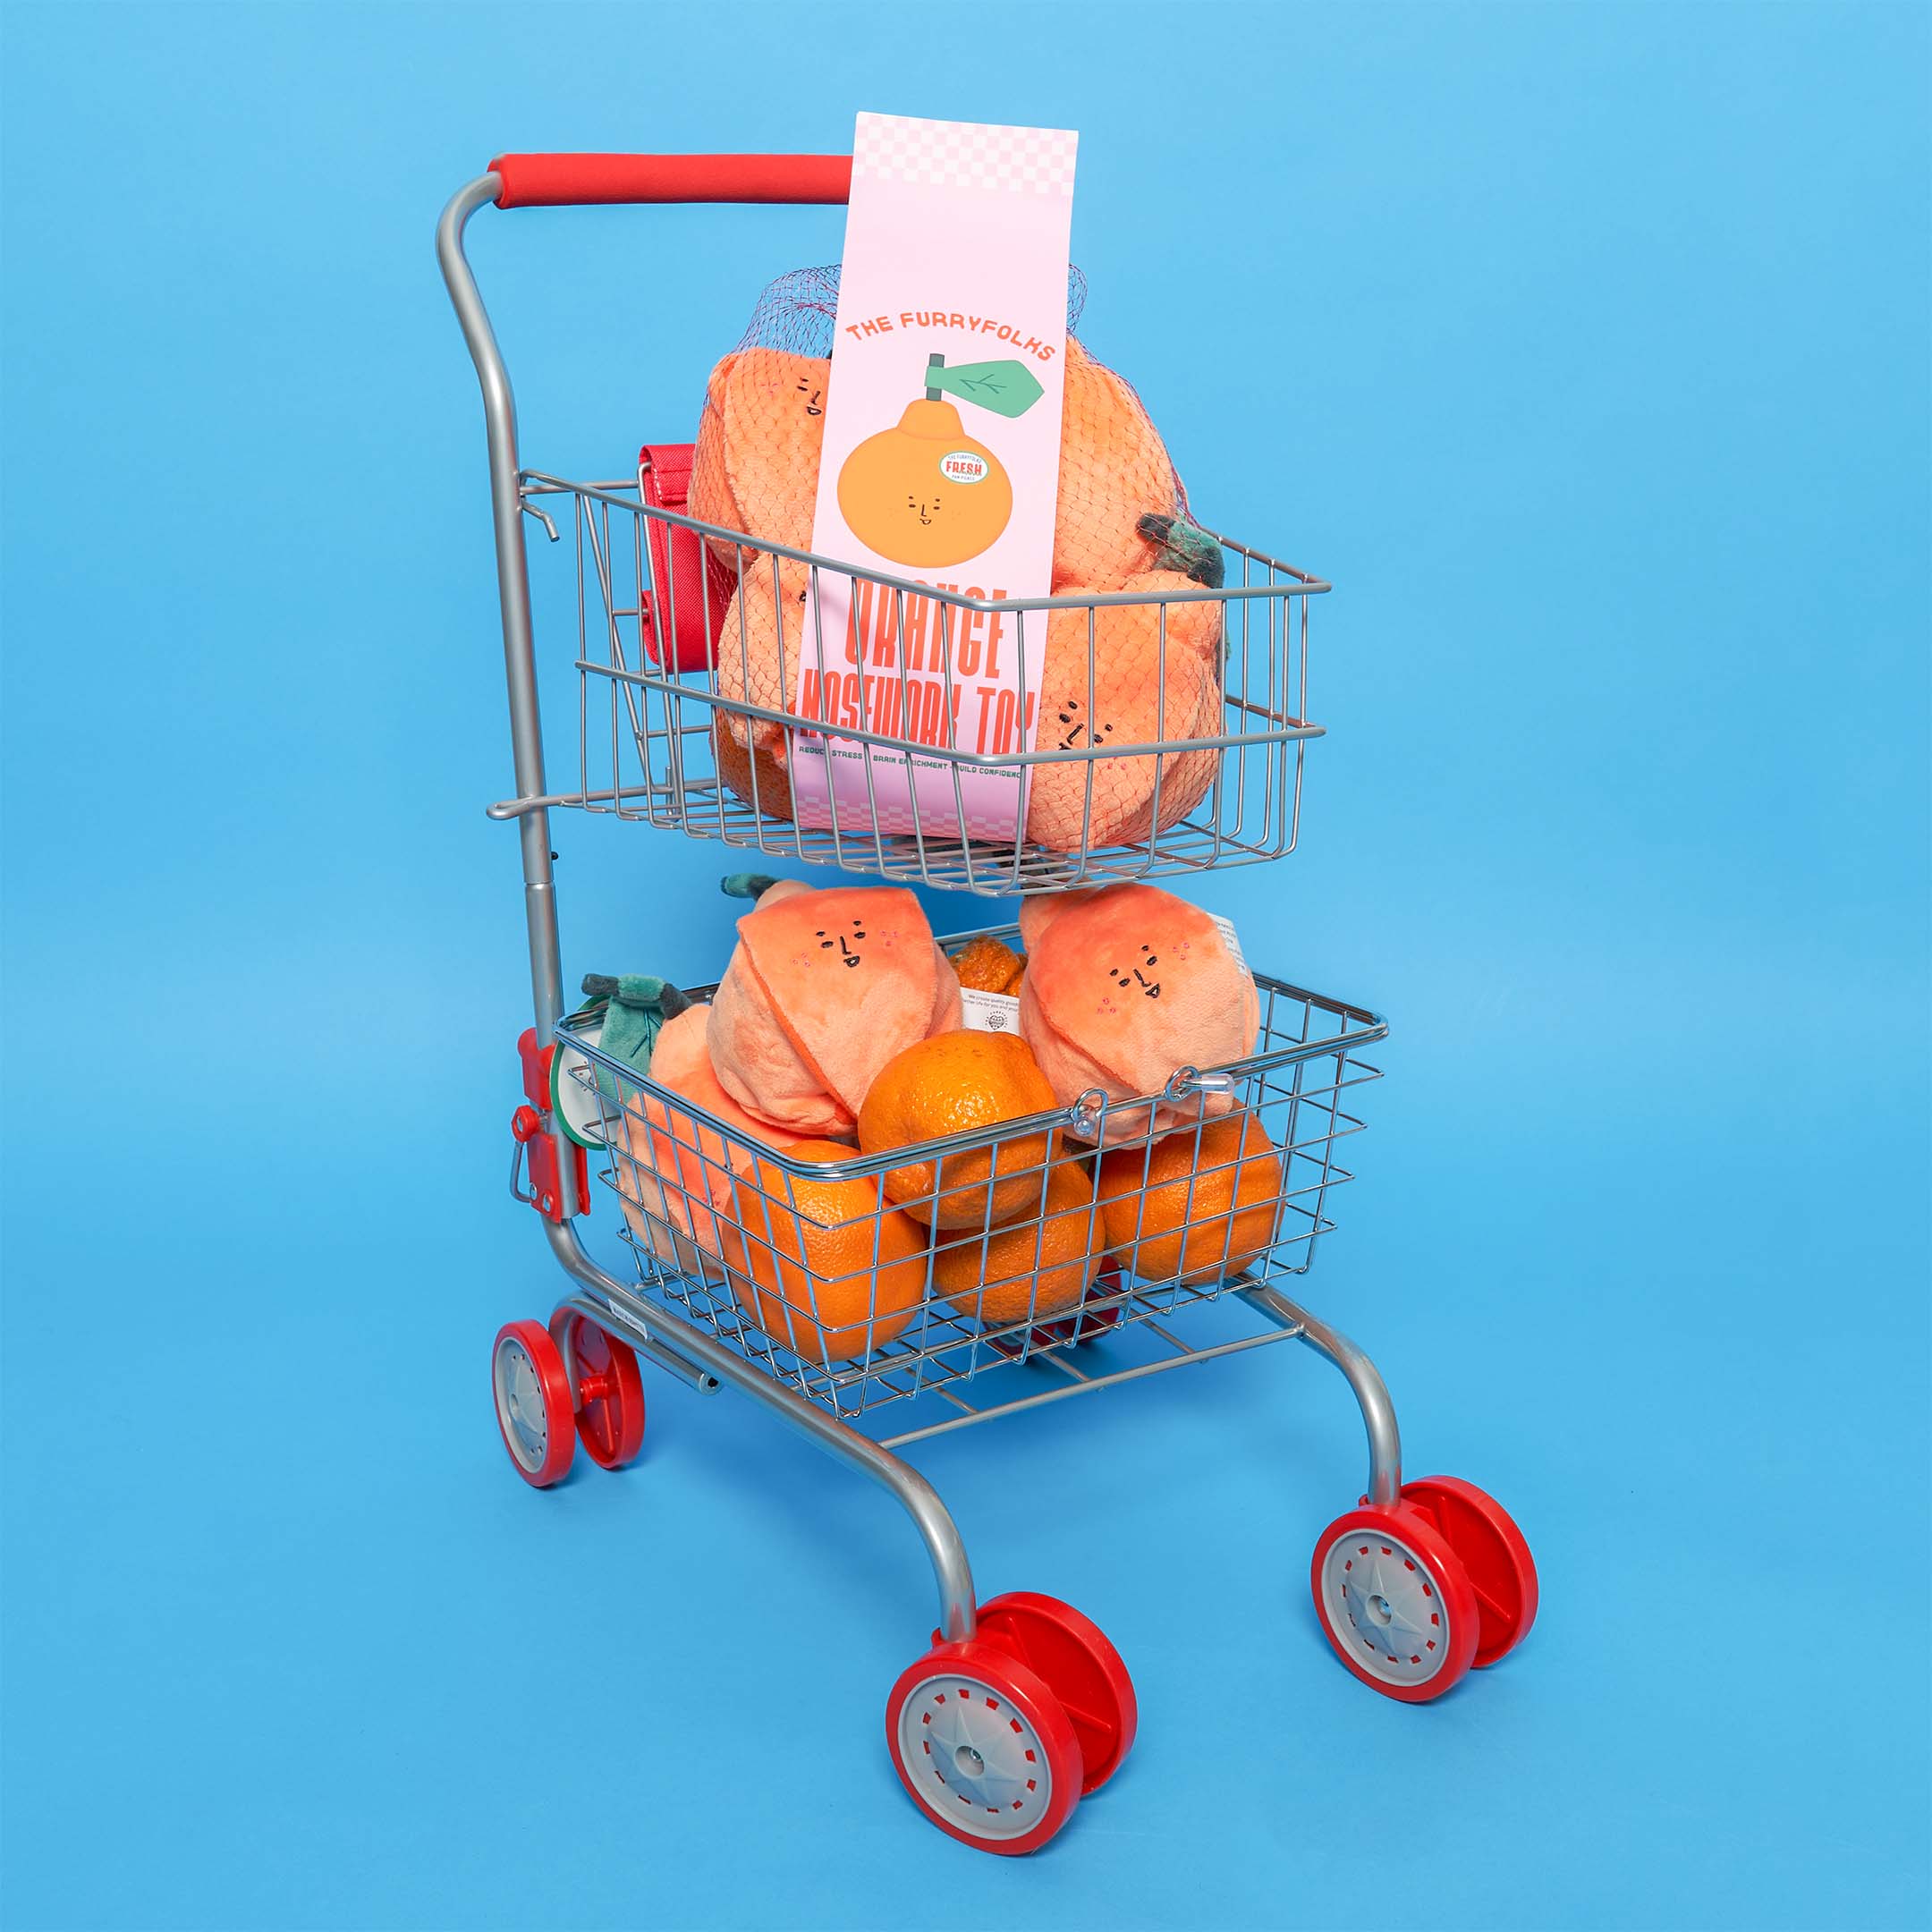 A miniature shopping cart filled with orange-shaped dog toys and oranges, with a label reading "The Furryfolks Orange Nosework Toy", set against a blue background.